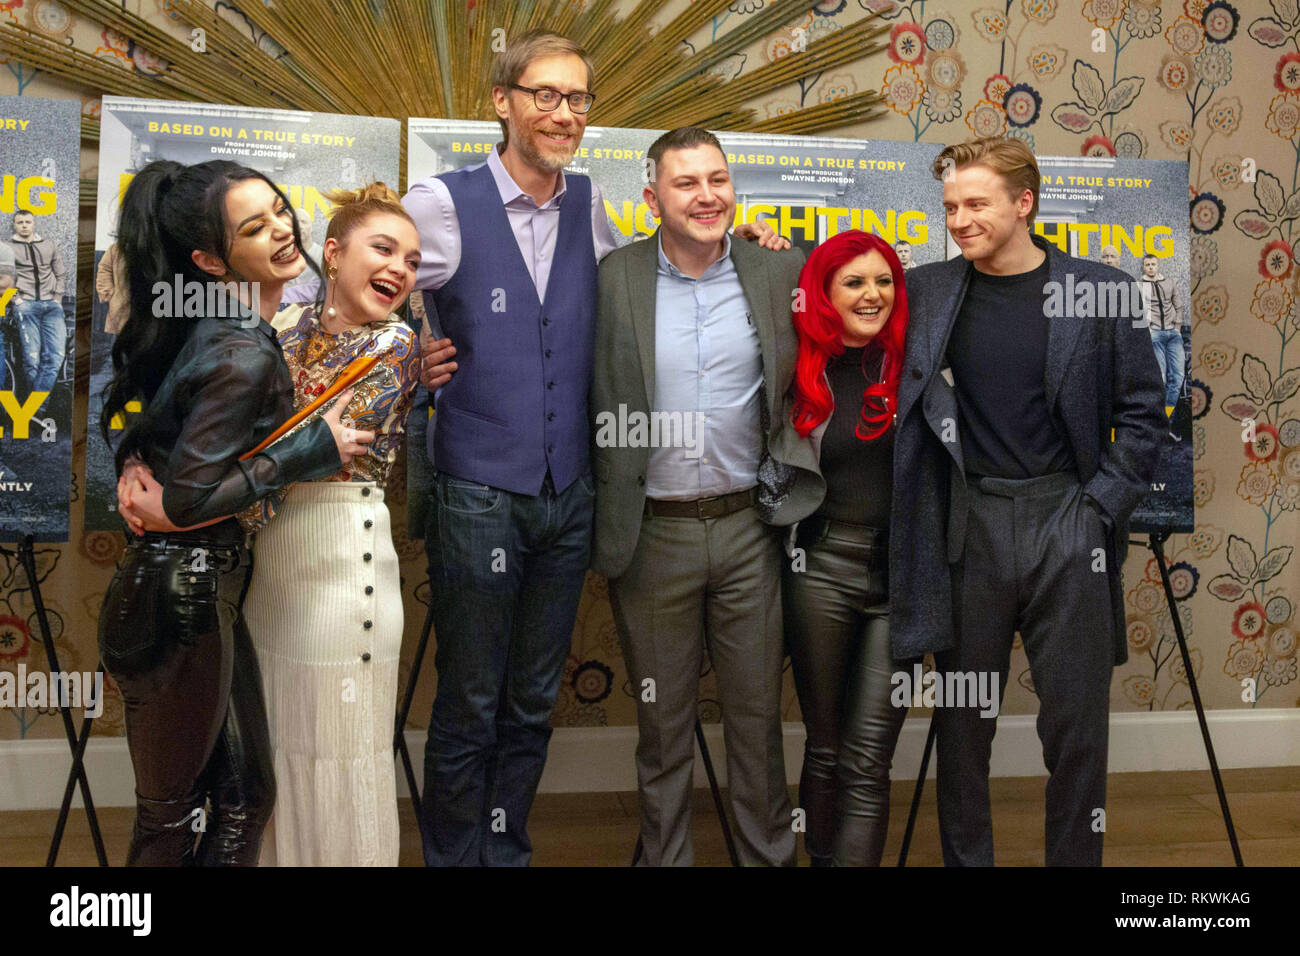 New York, NY, USA. 11th Feb. 2019. (L-R) WWE star Paige, actress, Florence Pugh, writer and director Stephen Merchant, Zak Bevis aka Zack Zodiac, Julia “Sweet Saraya” Hamer-Bevis, and actor Jack Lowden attend the New York Tastemaker screening of “Fighting with My Family” at the Crosby Street Hotel in New York City on February 11, 2019. Credit: Jeremy Burke/Alamy Live News Stock Photo